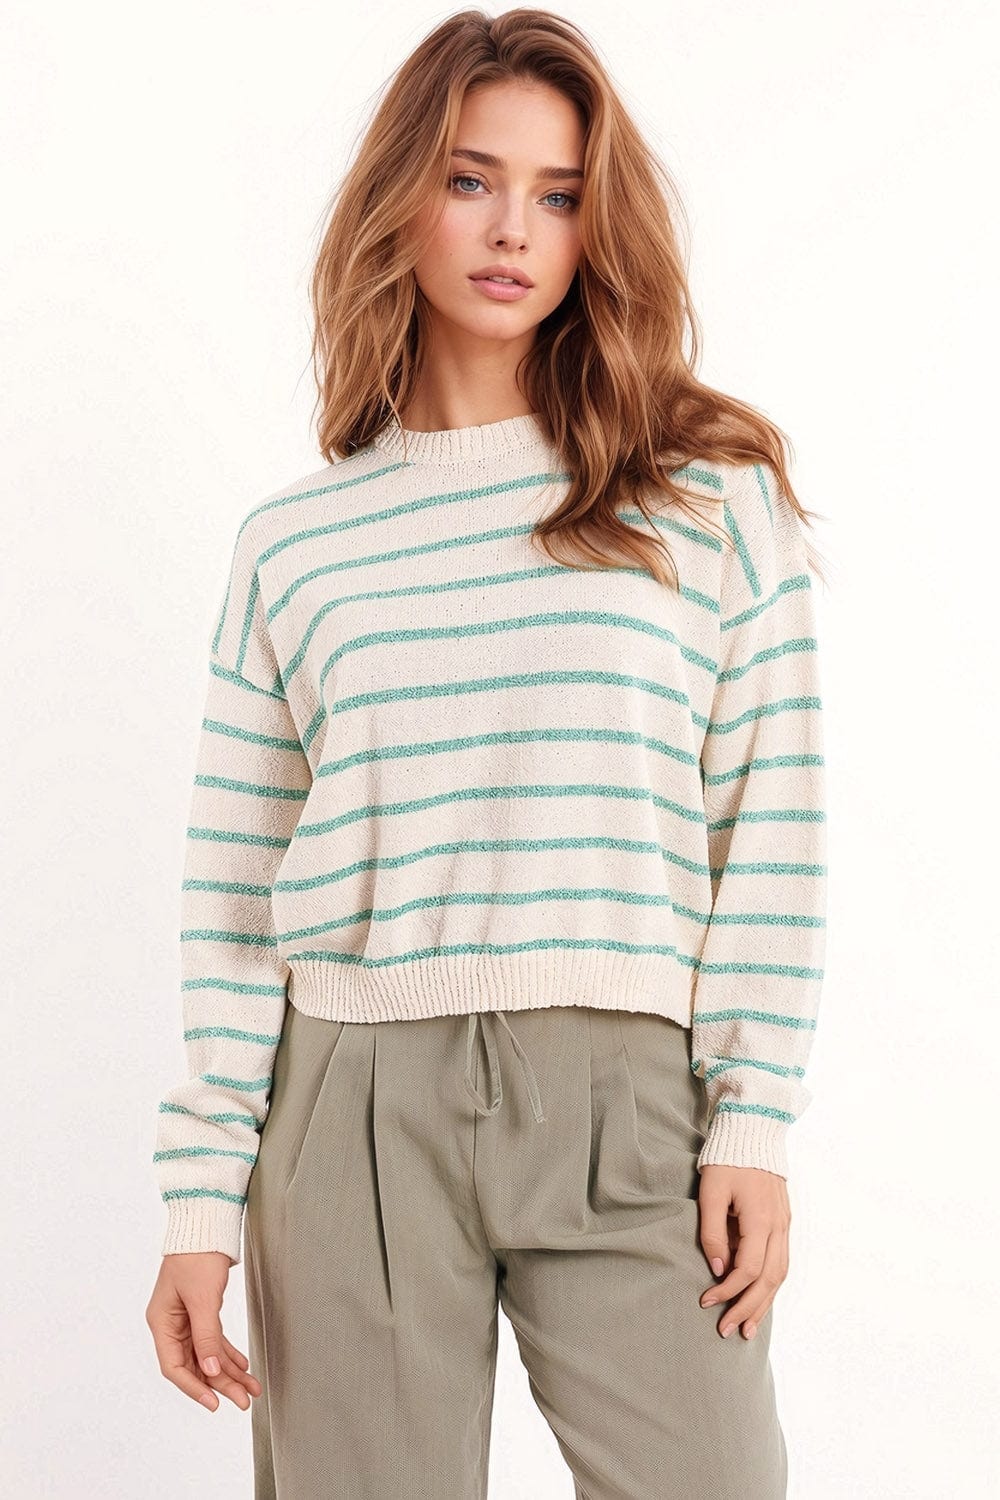 Q2 Women's Sweater Sweater With Drop Shoulders In White With Green Stripes